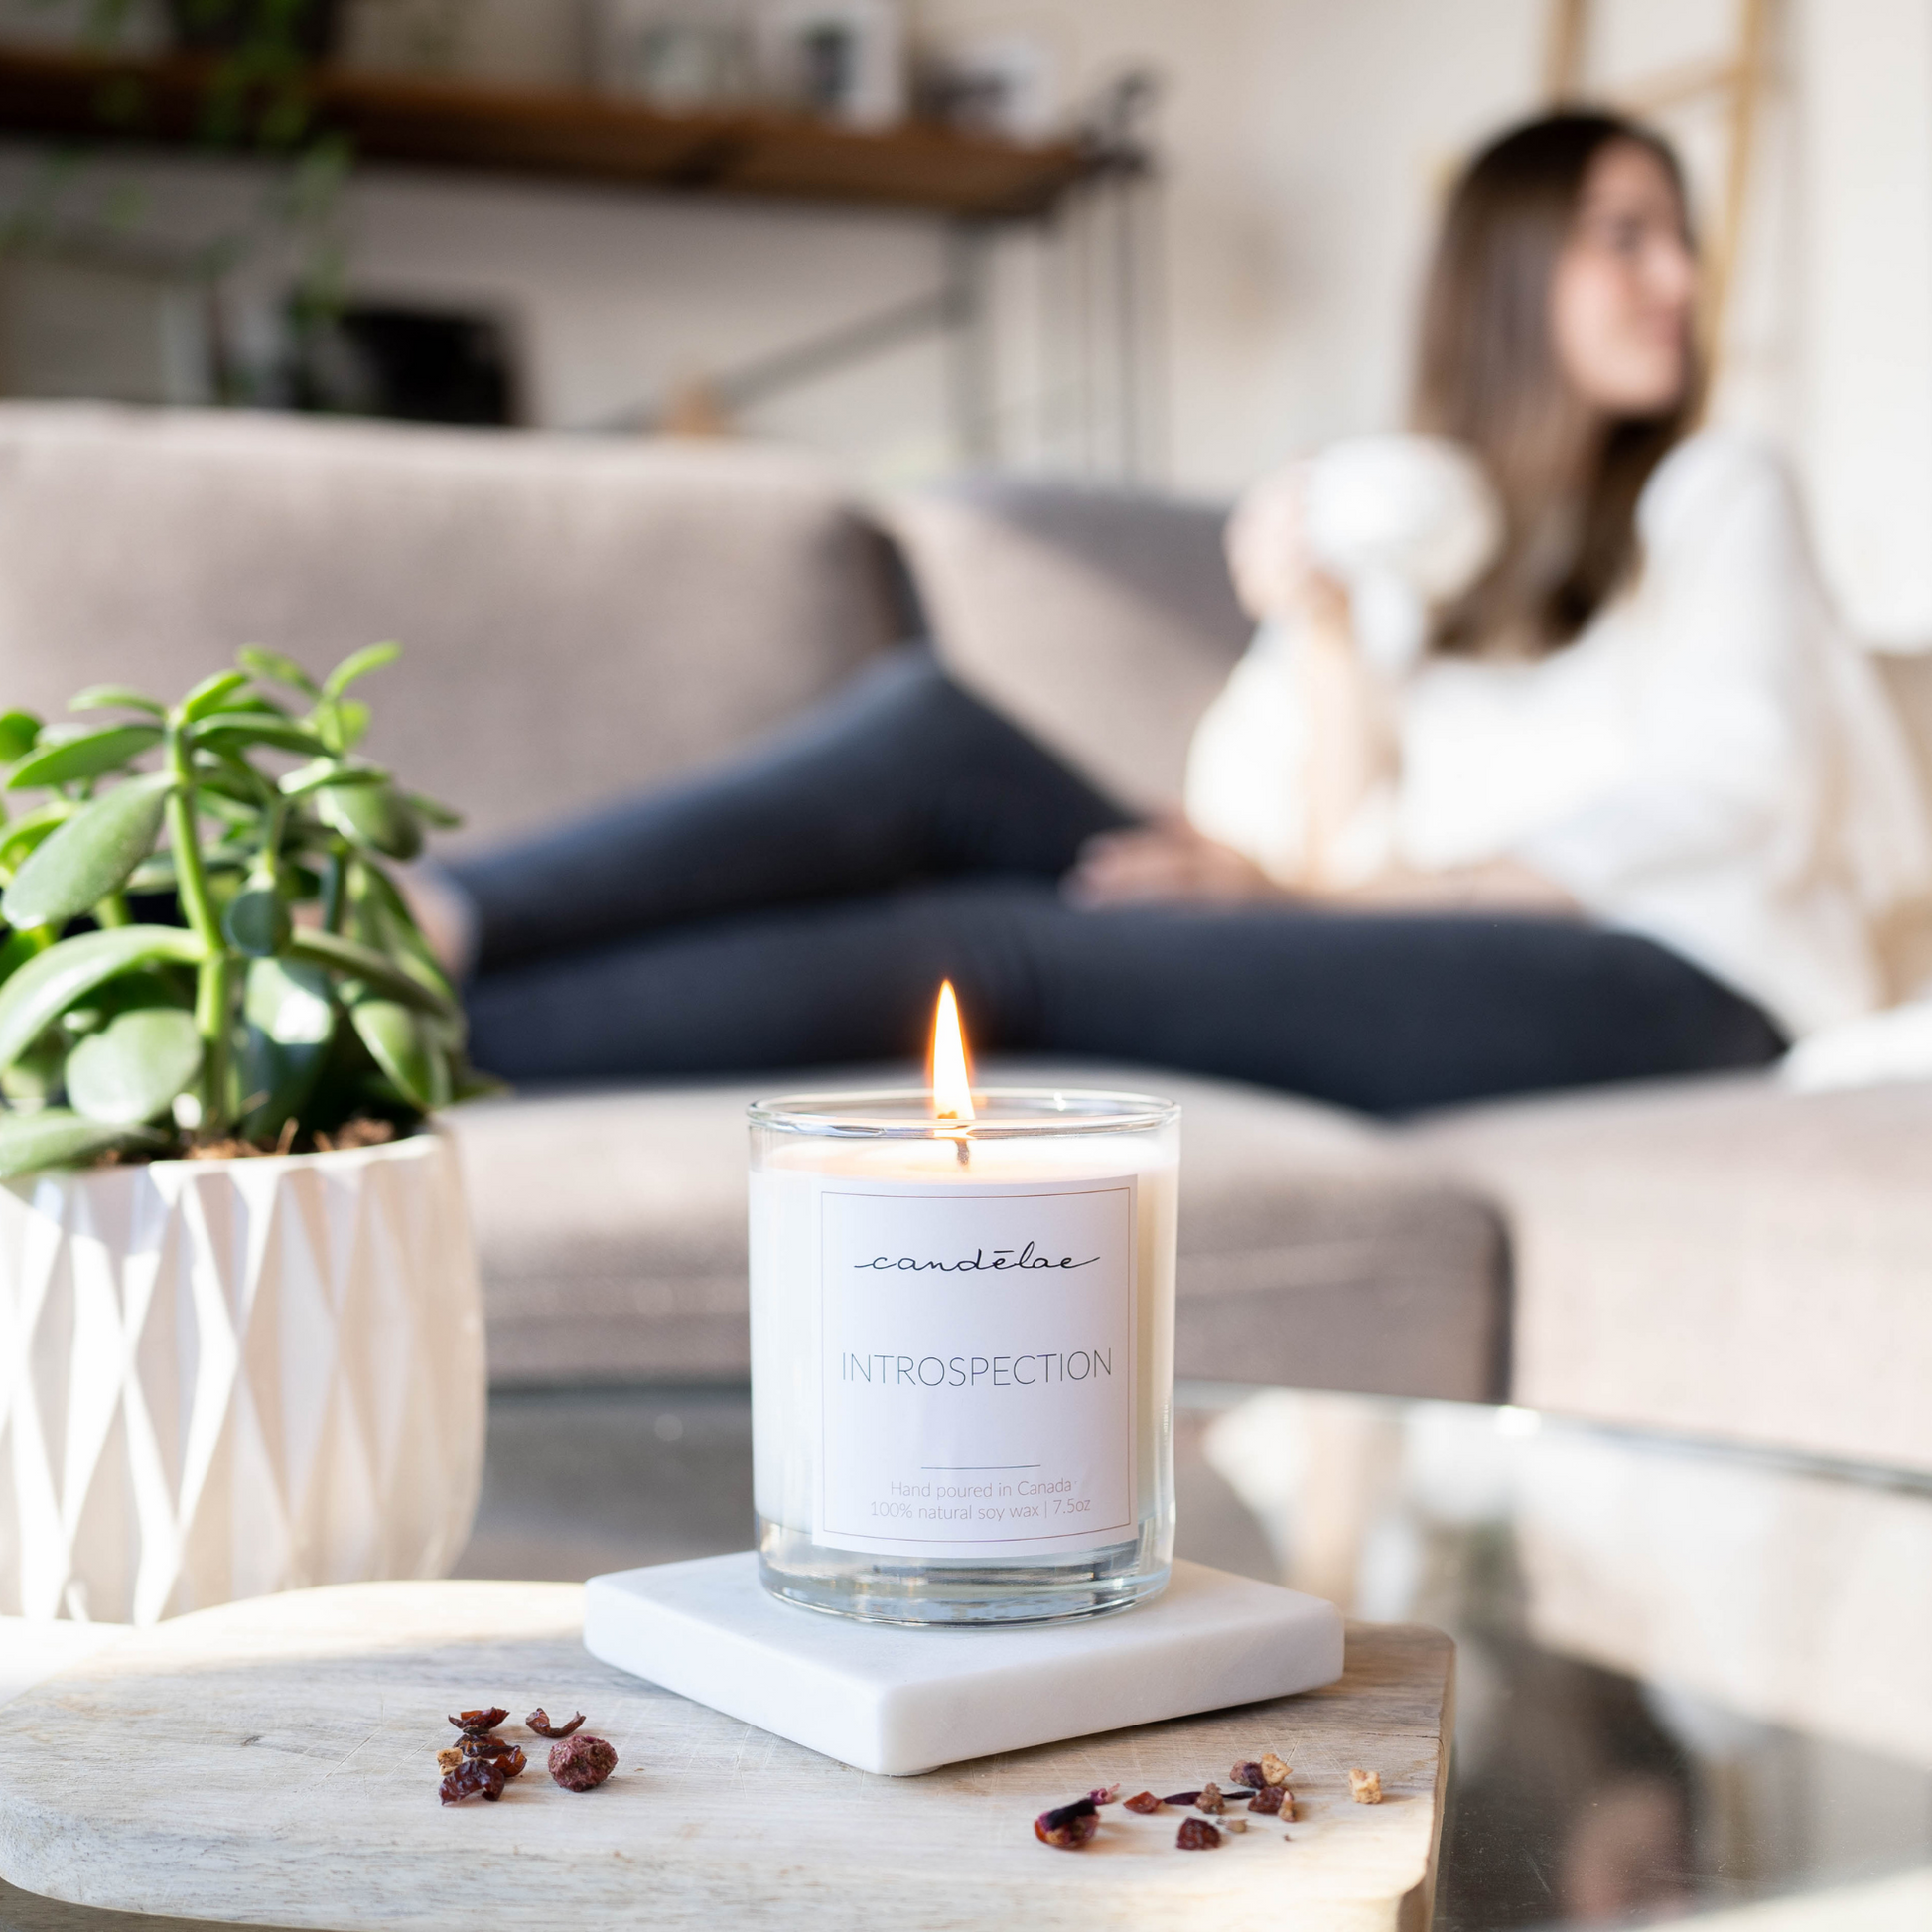 A woman is drinking her tea while she is relaxing with her Introspection candle from candēlae